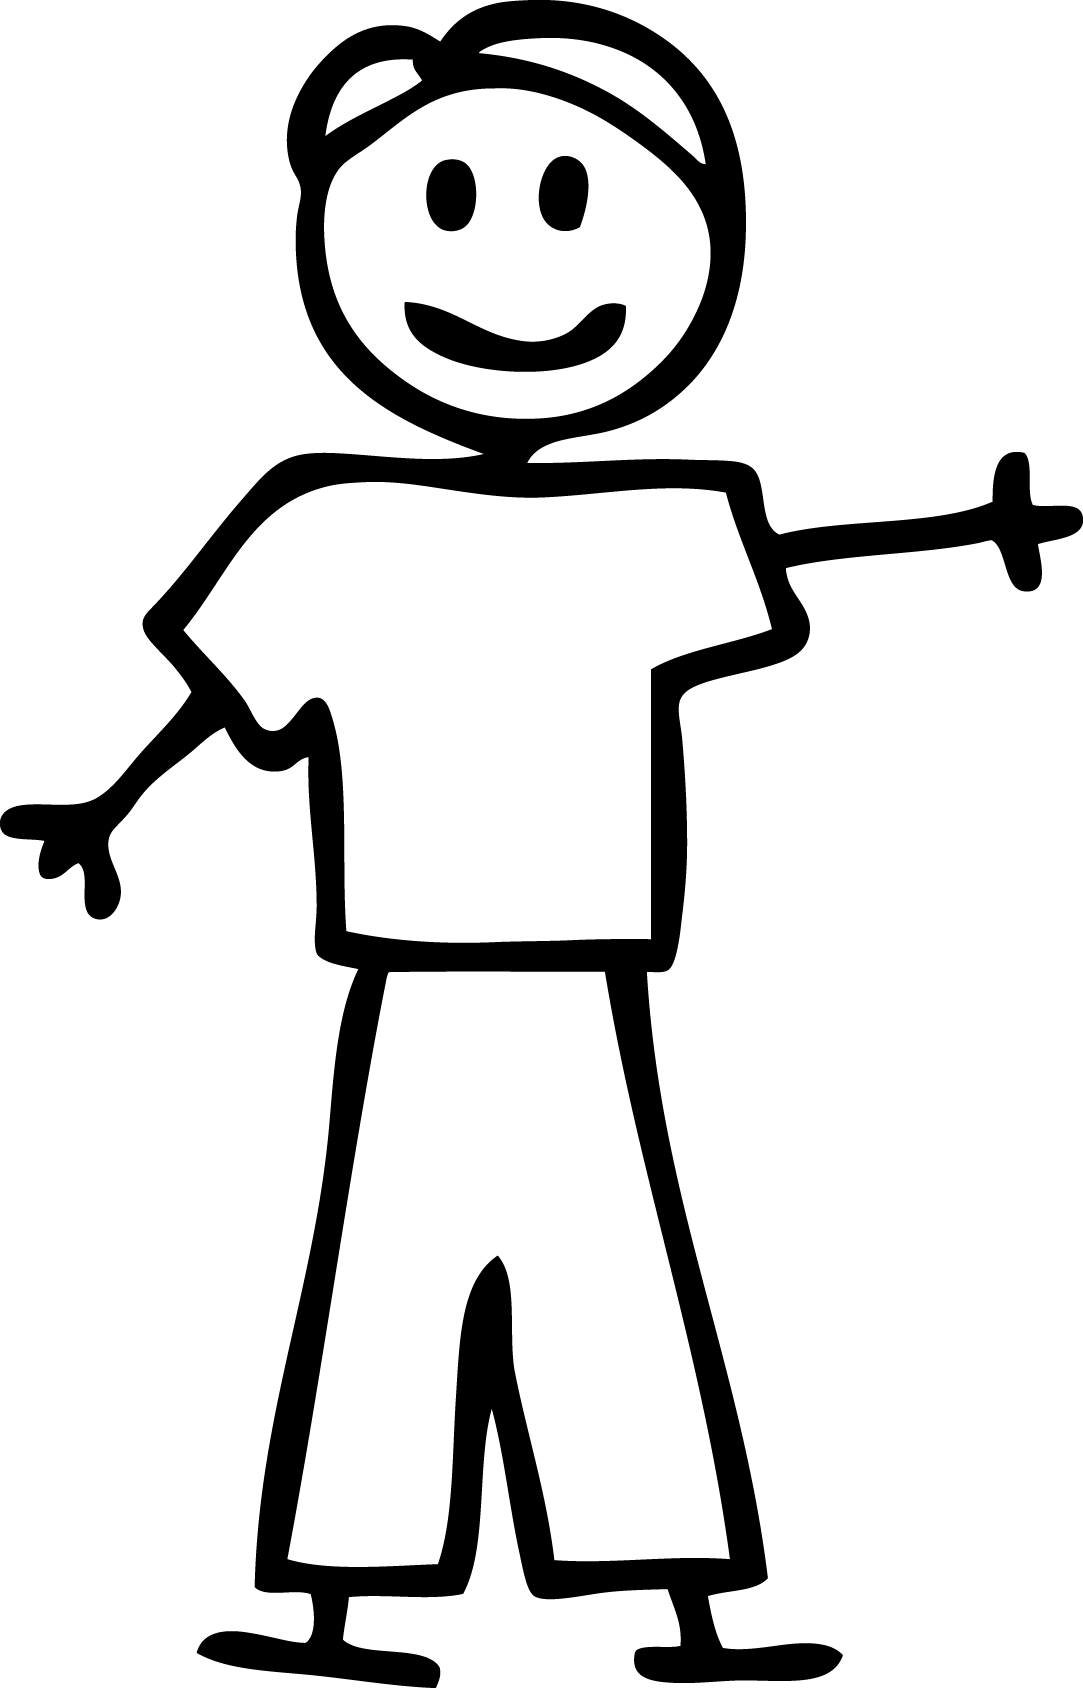 Stick People Images - Cliparts.co